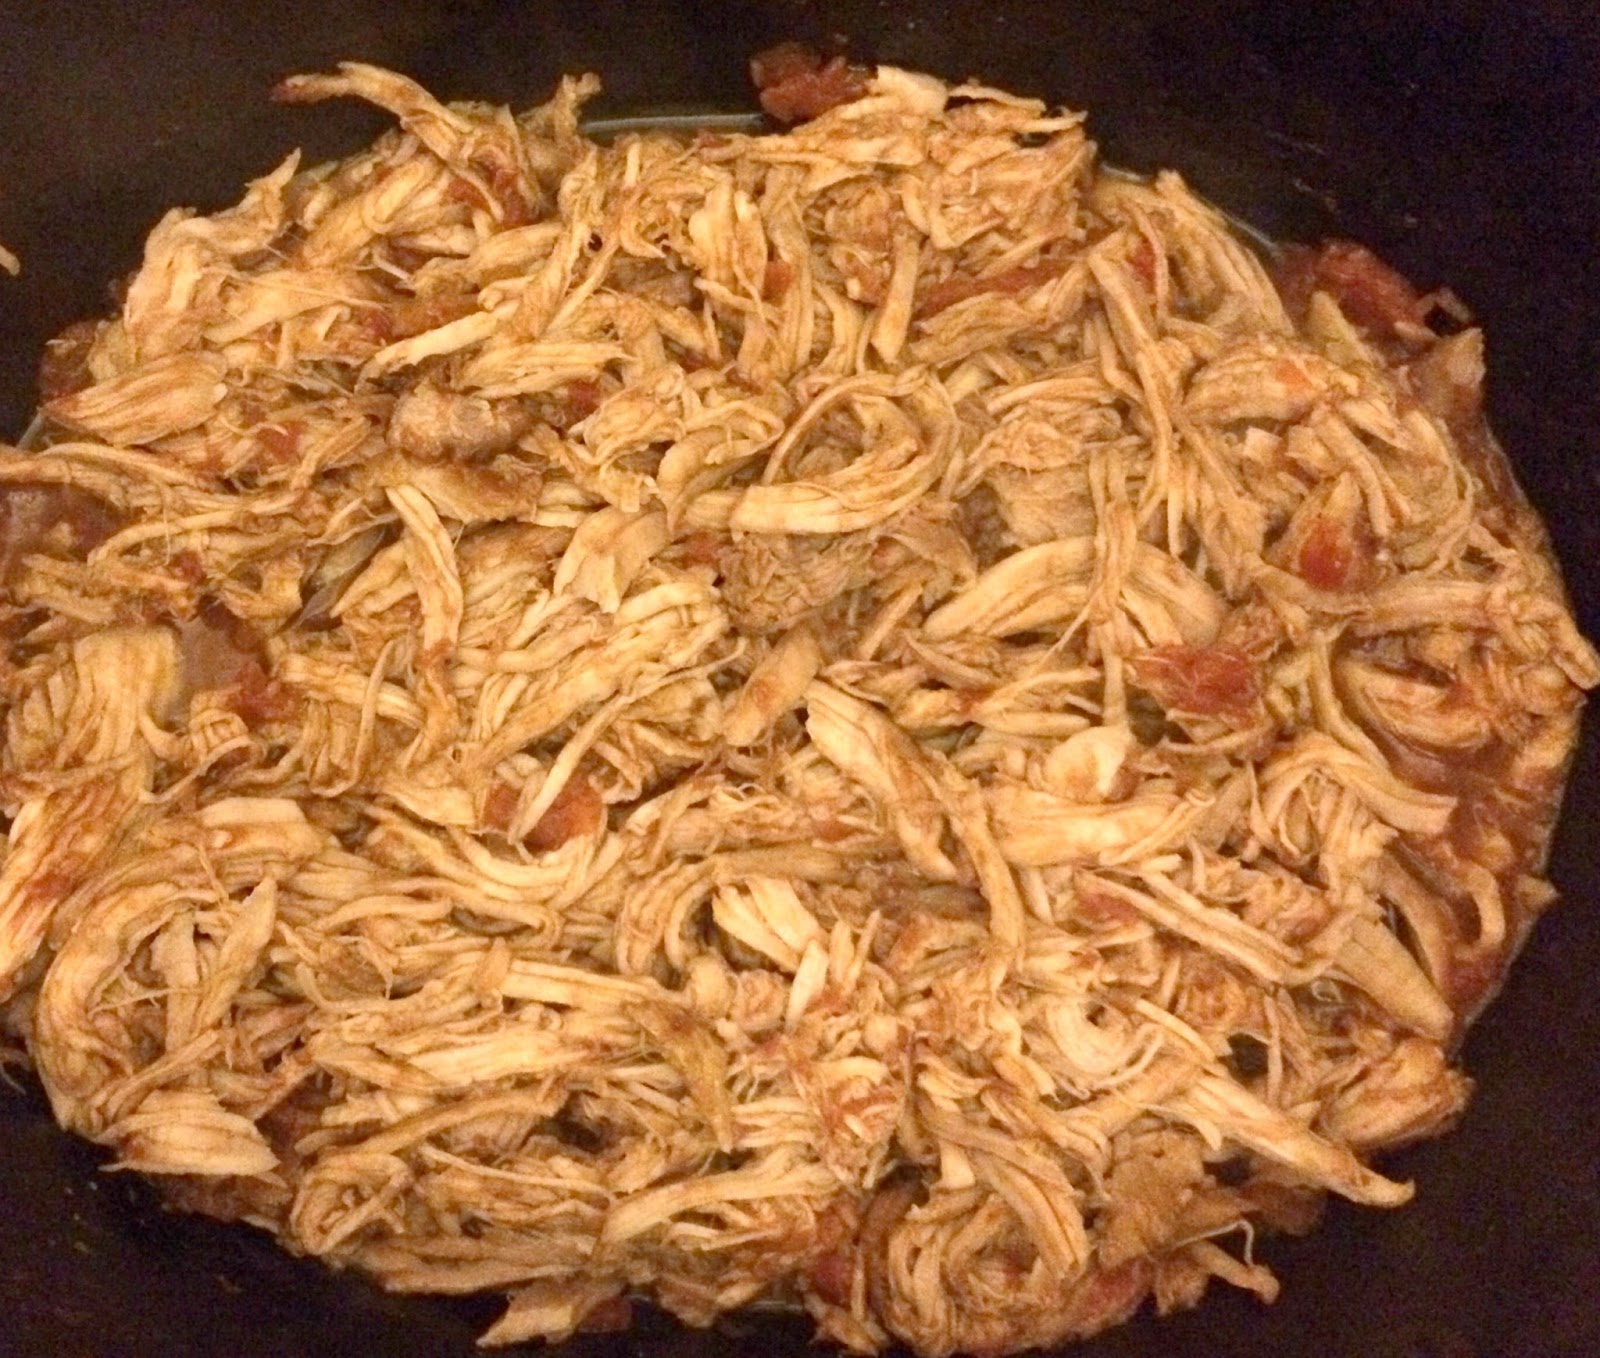 Slimming World Syn Free BBQ Slow Cooked Pulled Pork - Recipe ...